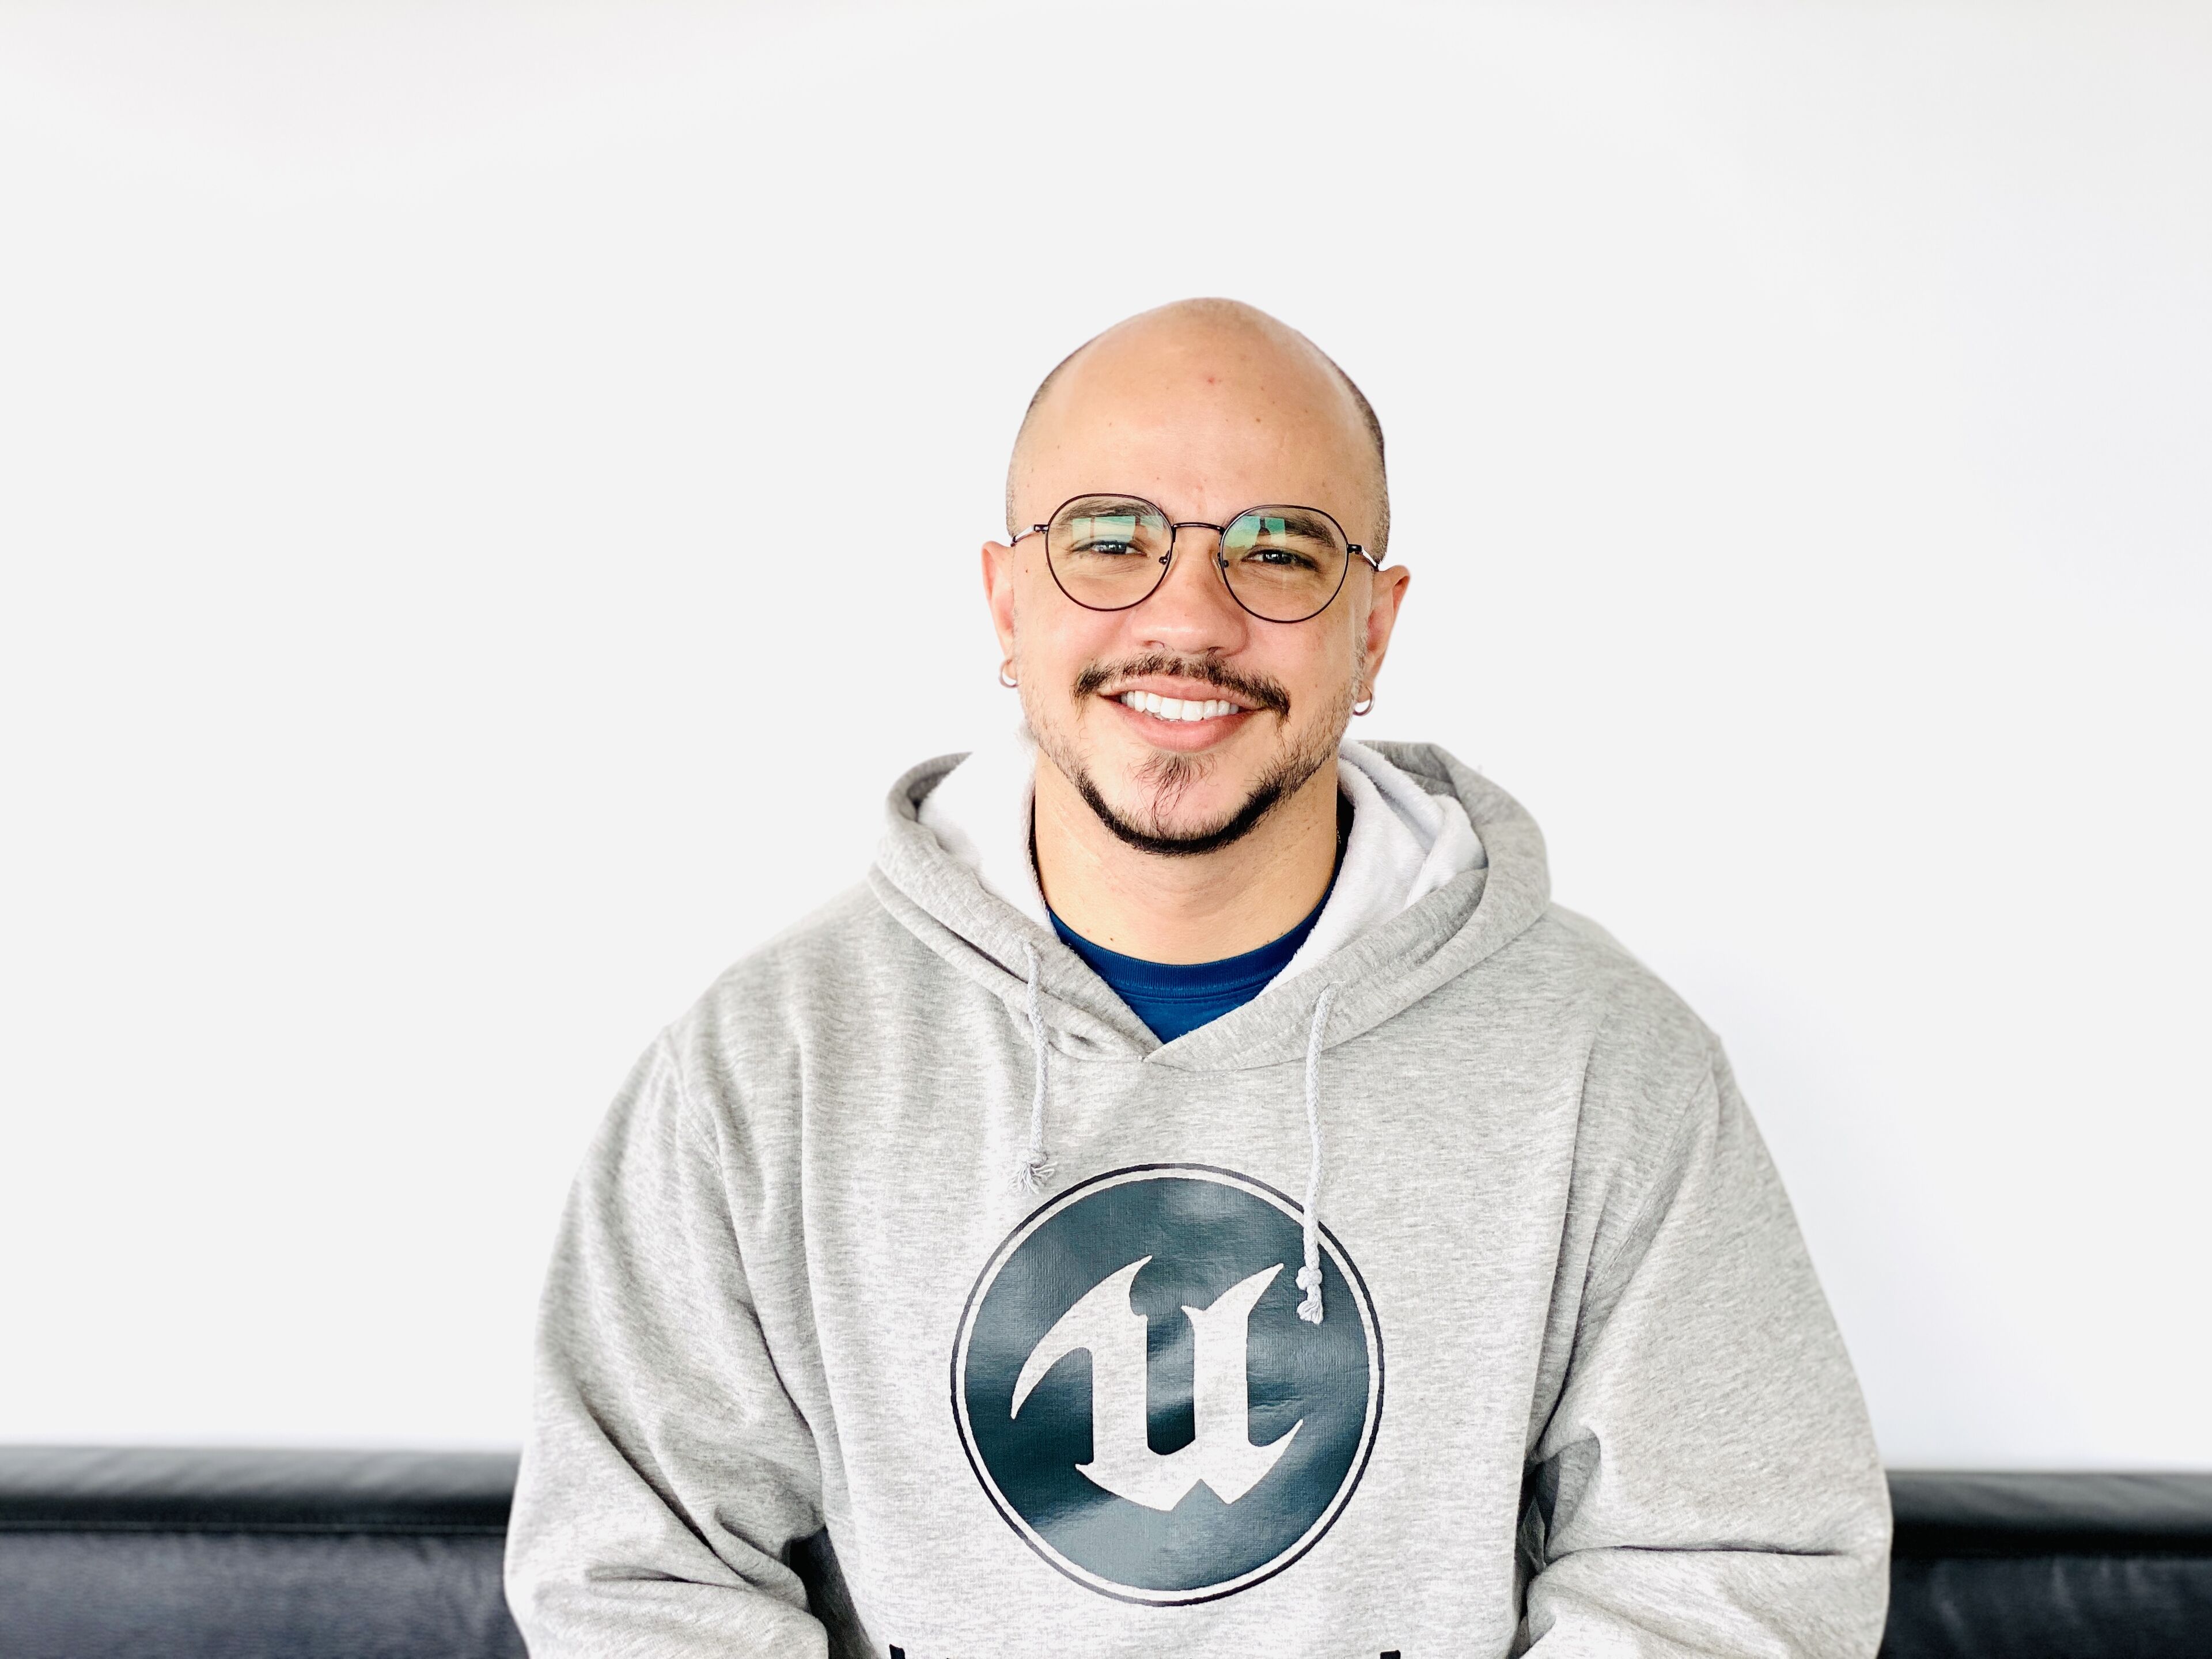 A cheerful bald man with a beard, wearing round glasses and a gray hoodie with a logo, posing against a white background.